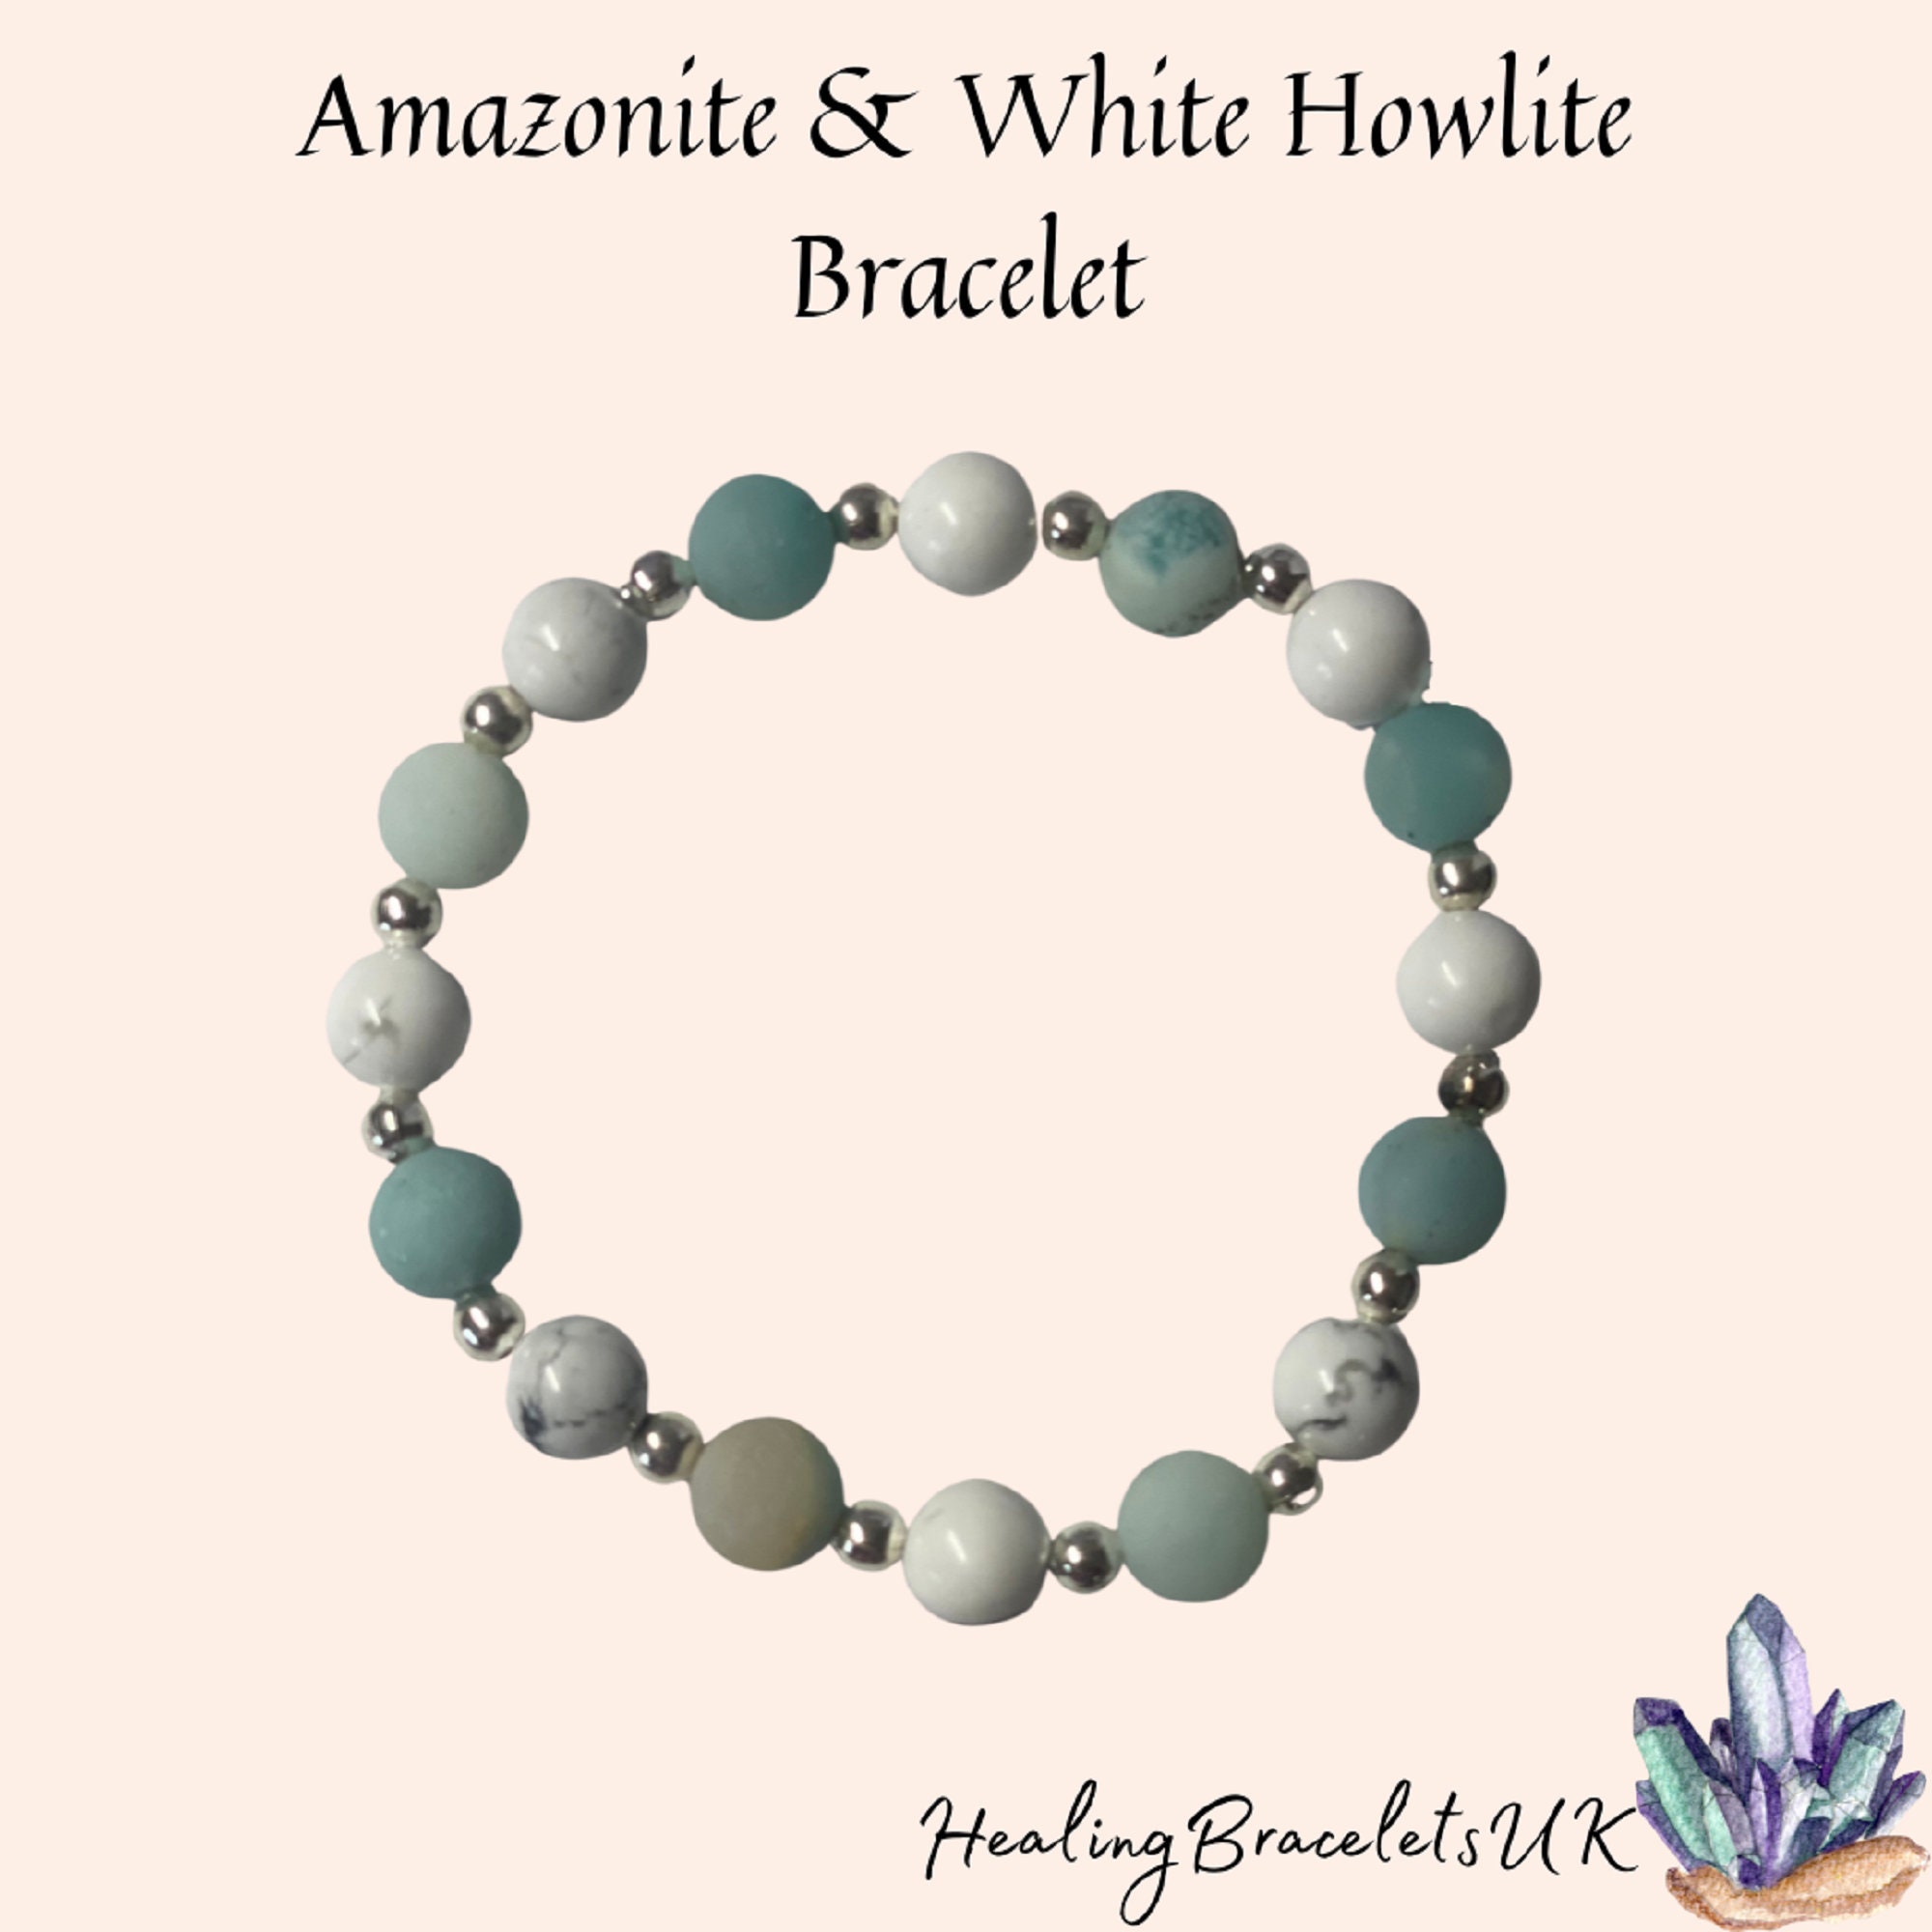 Women's Wide Bracelet with Howlite Stones and Cooper Beads. Ethnic Jewelry  : Amazon.co.uk: Handmade Products